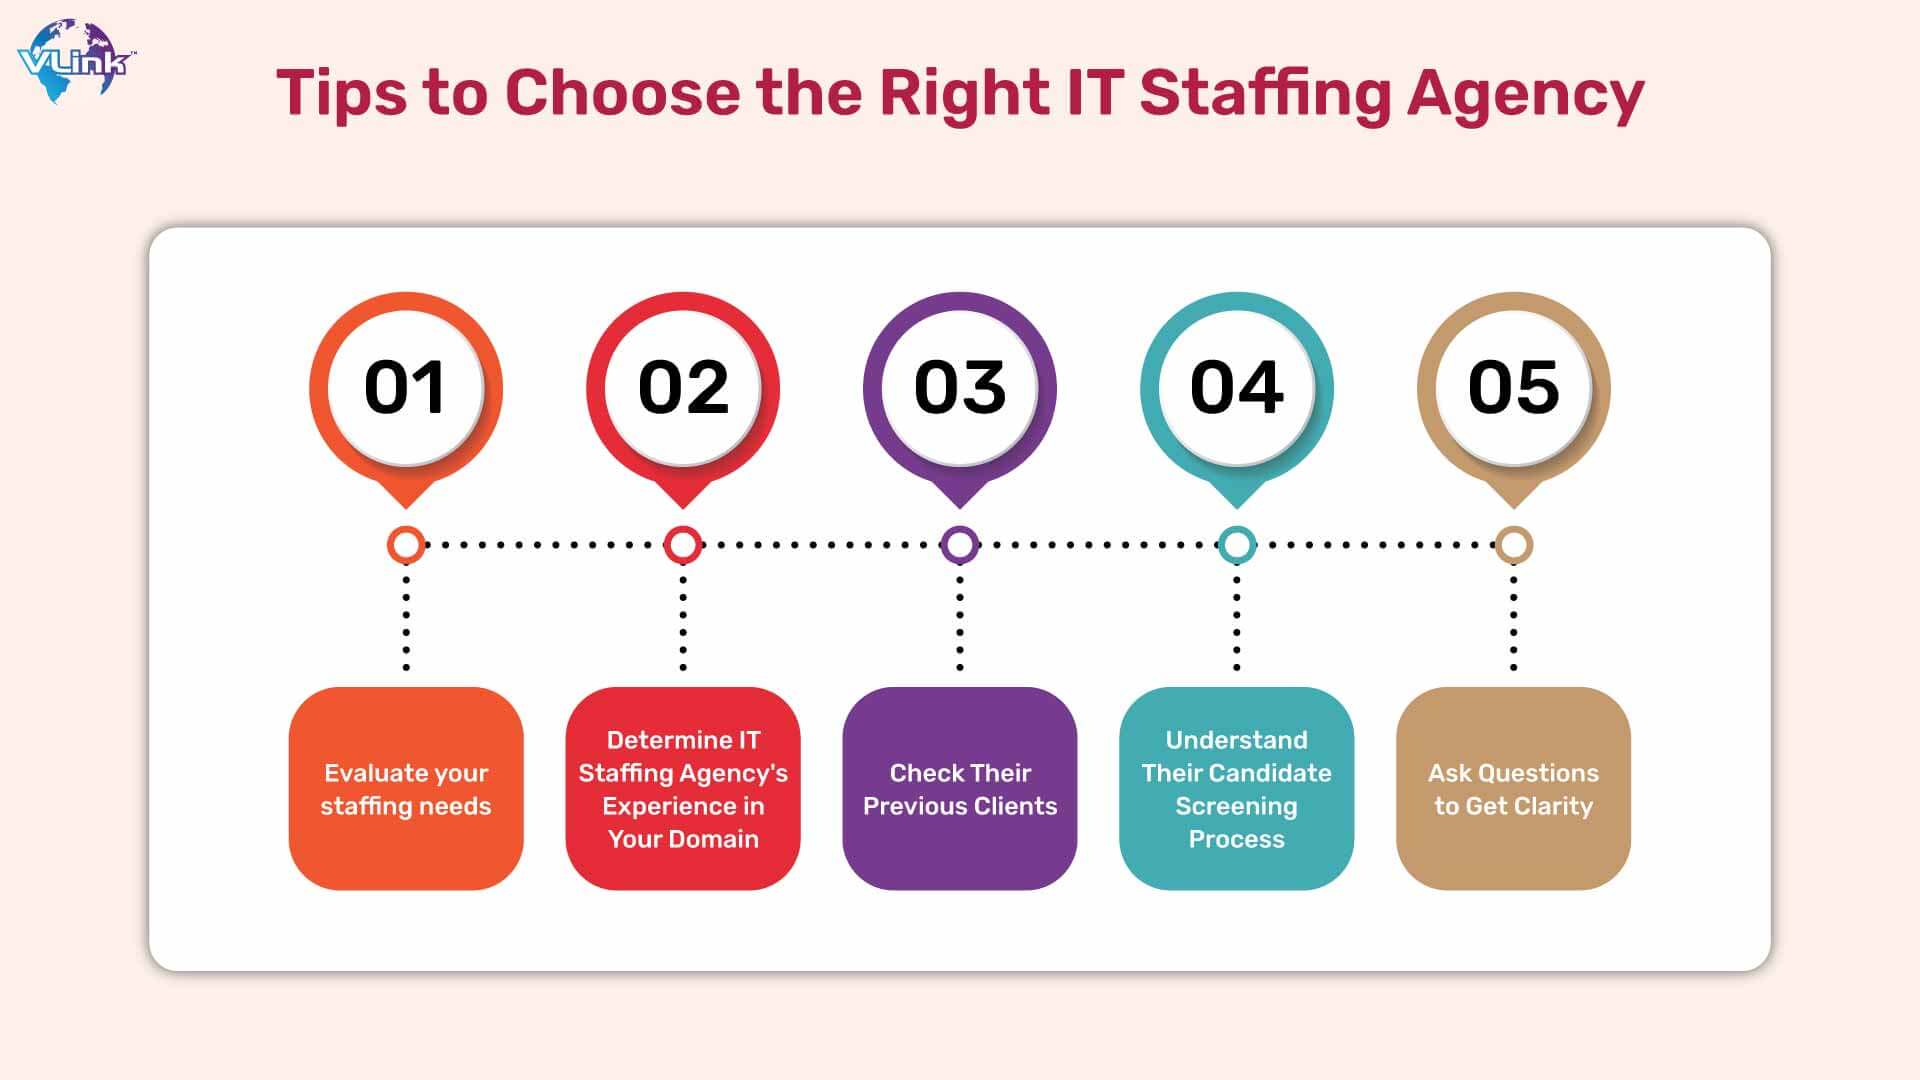 How Do You Choose the Right IT Staffing Agency